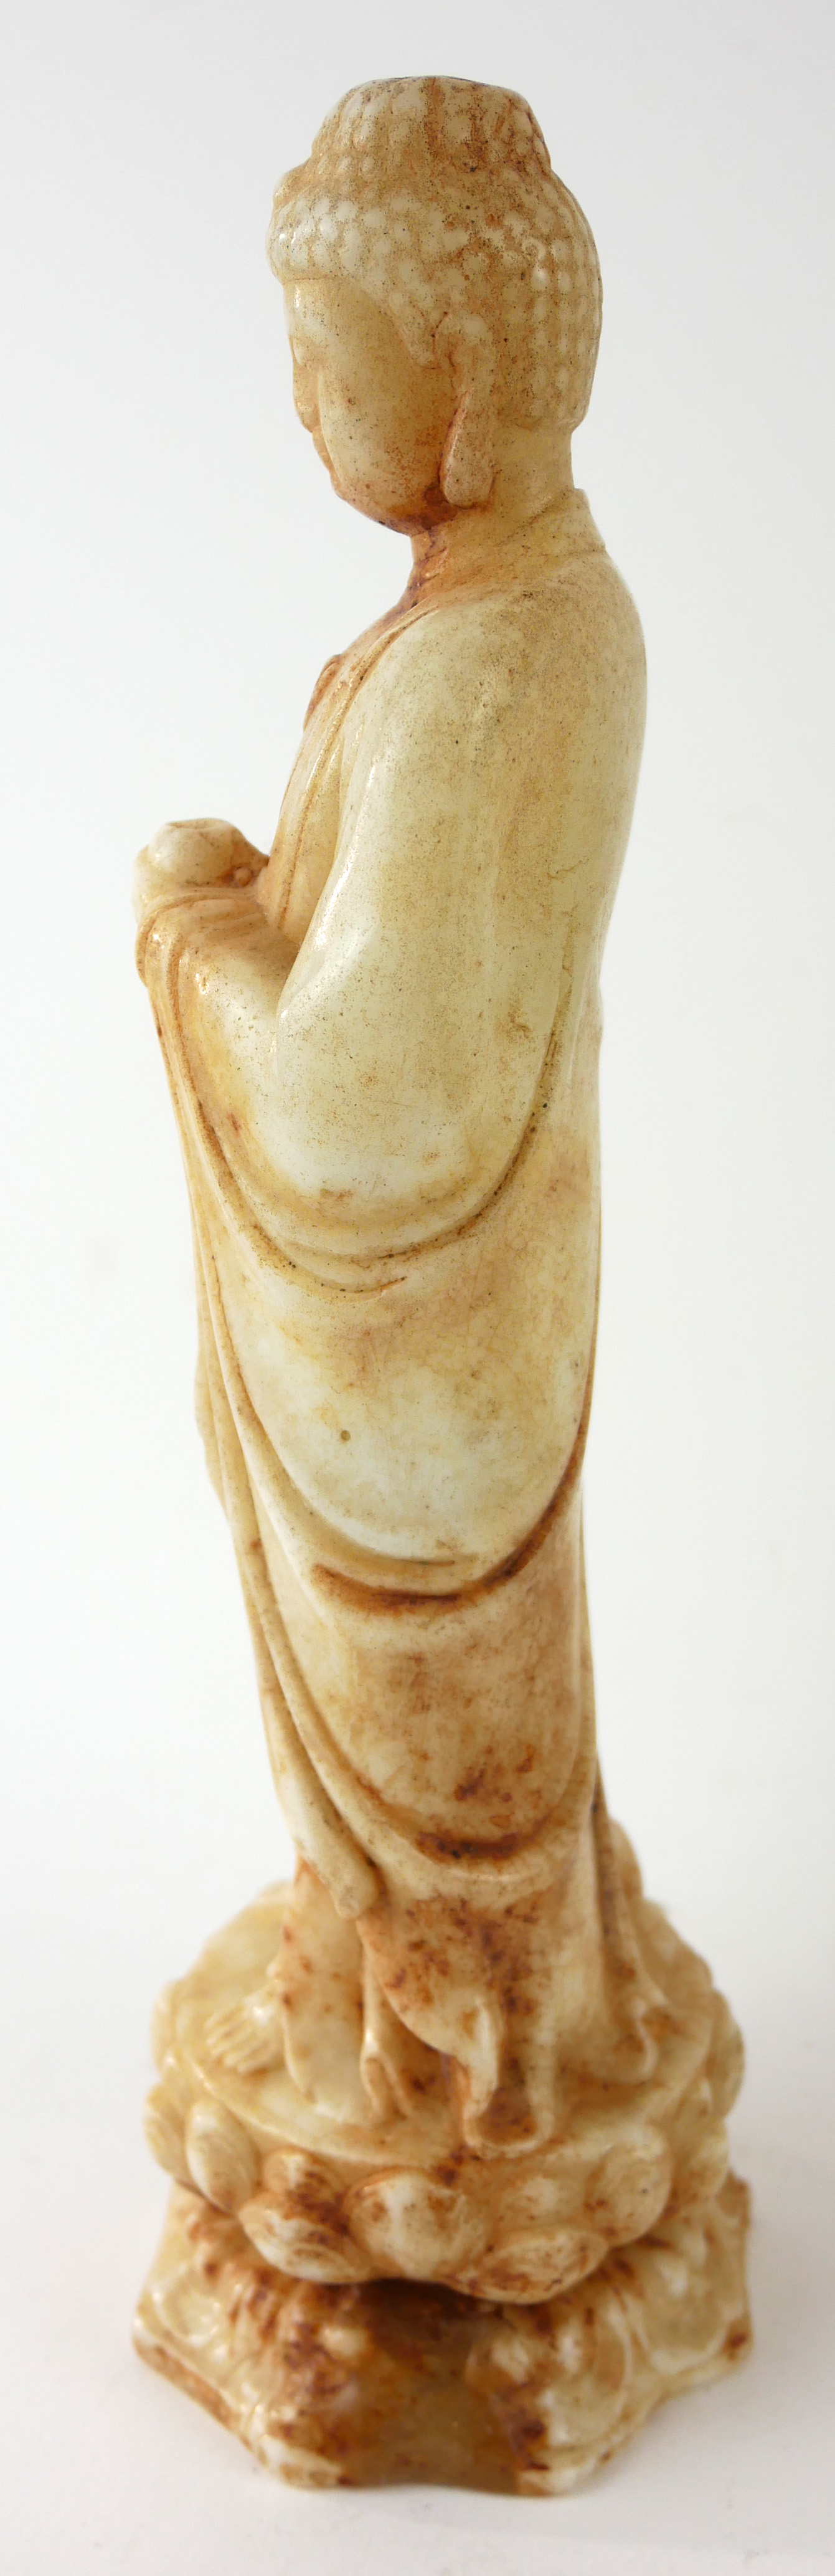 A CHINESE WHITE RUSSET JADE BUDDHA STATUE Standing pose on double lotus base. (approx 23cm) - Image 2 of 5